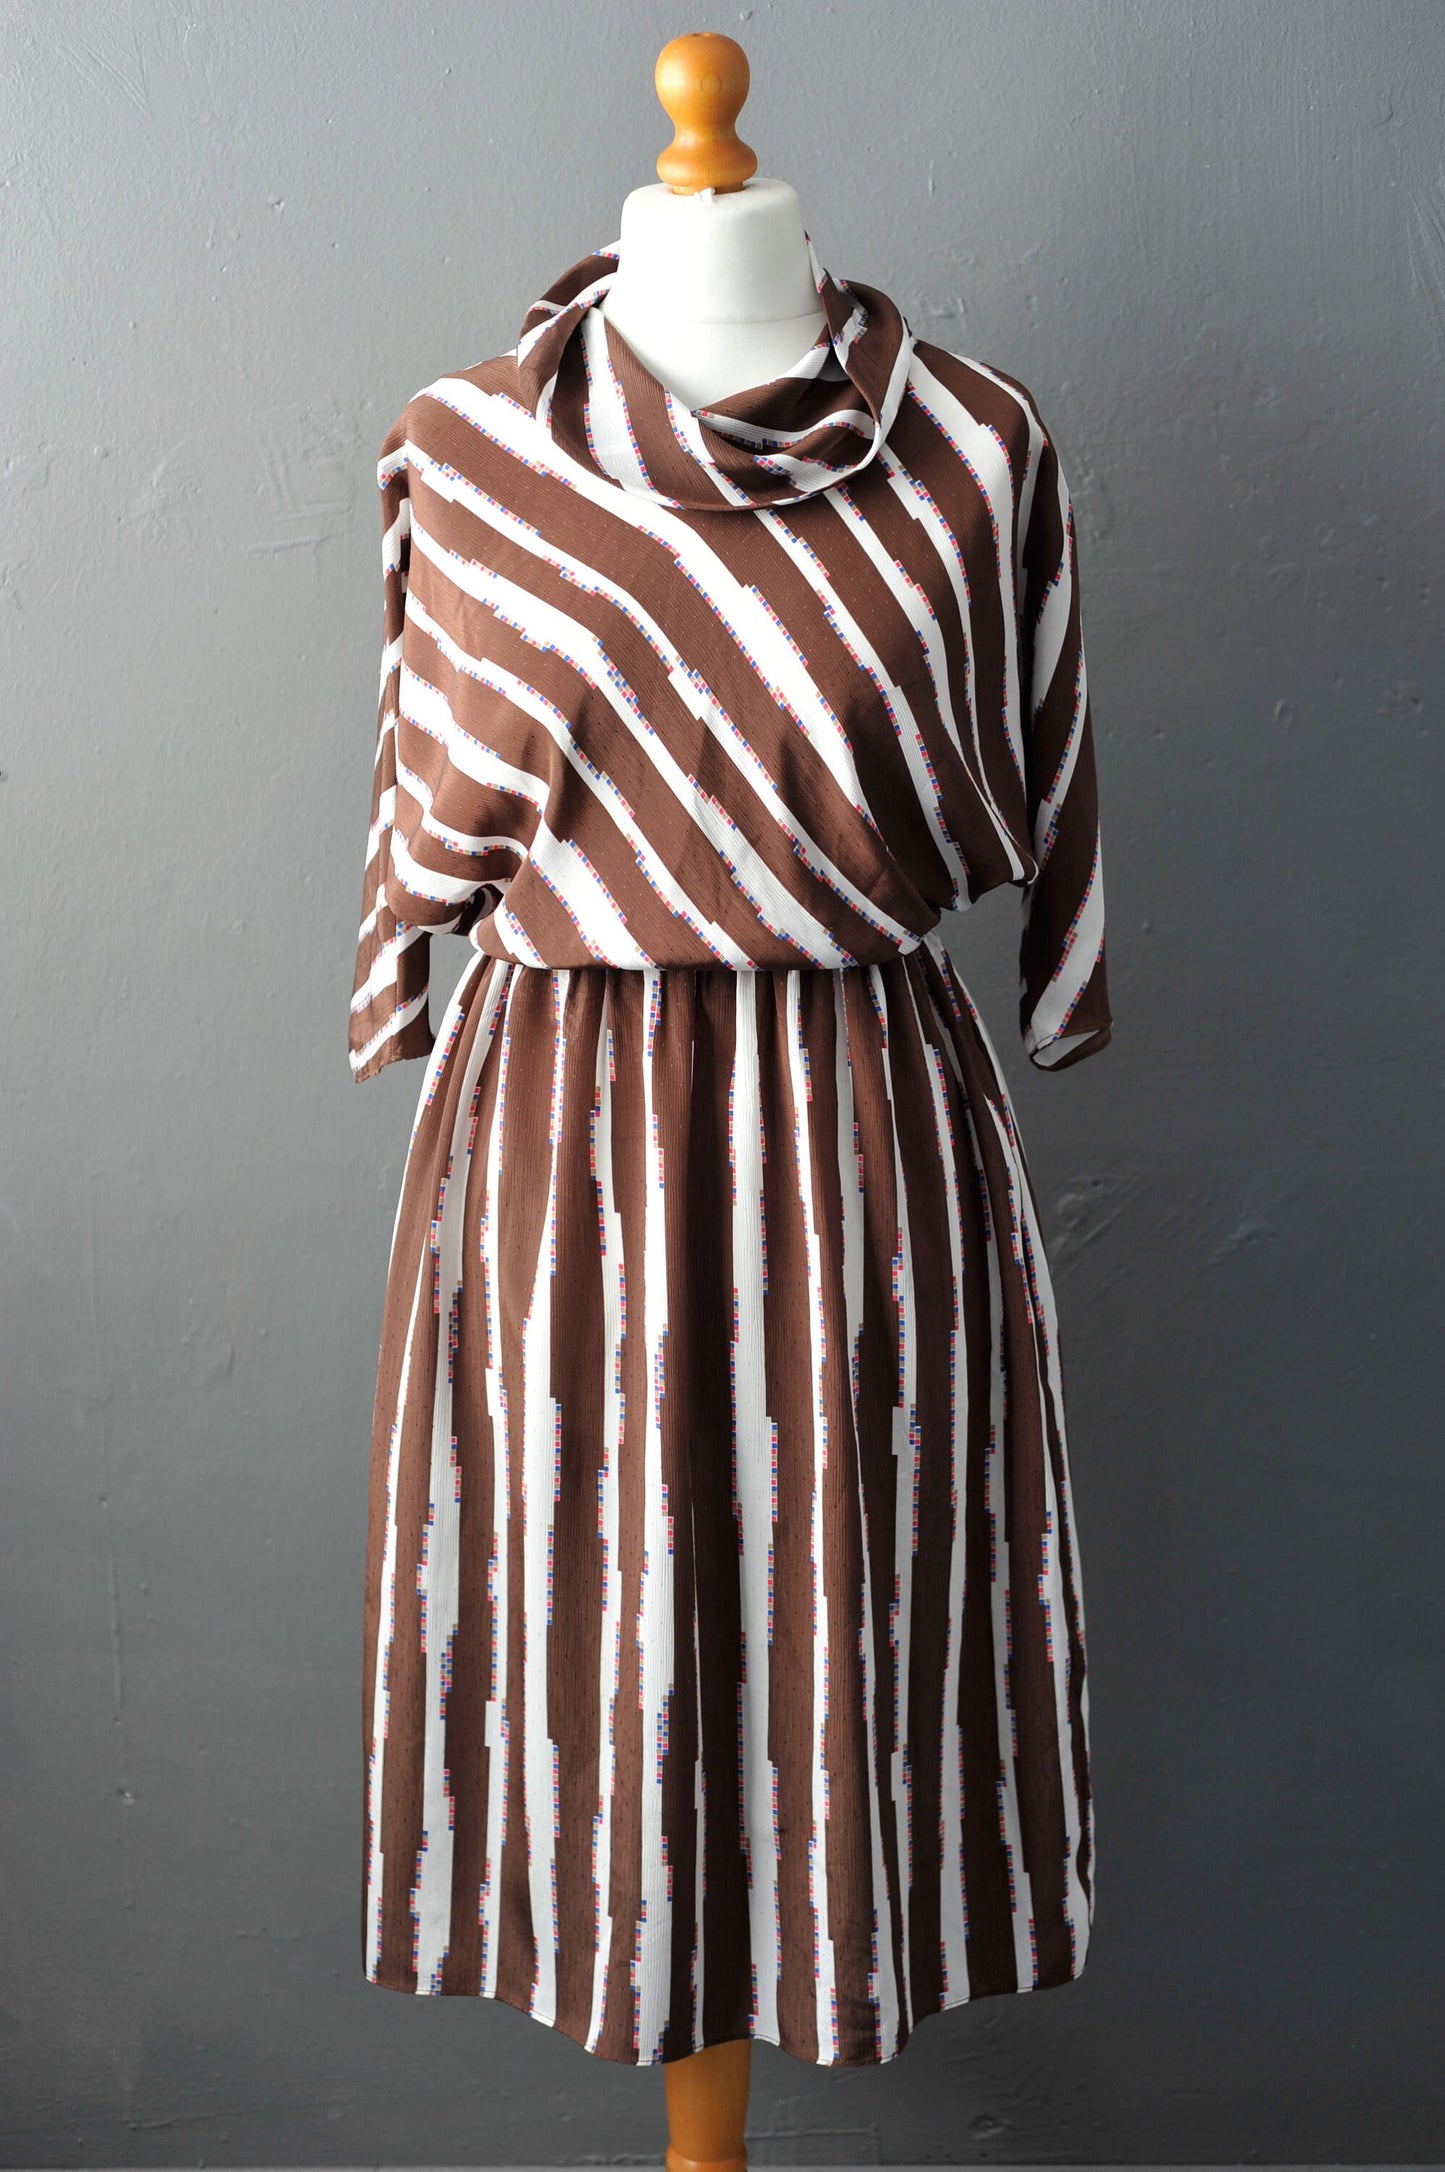 80s Cowl Batwing Dress by Orite, Loose Diagonal Stripes Tunic Dress, Size Small